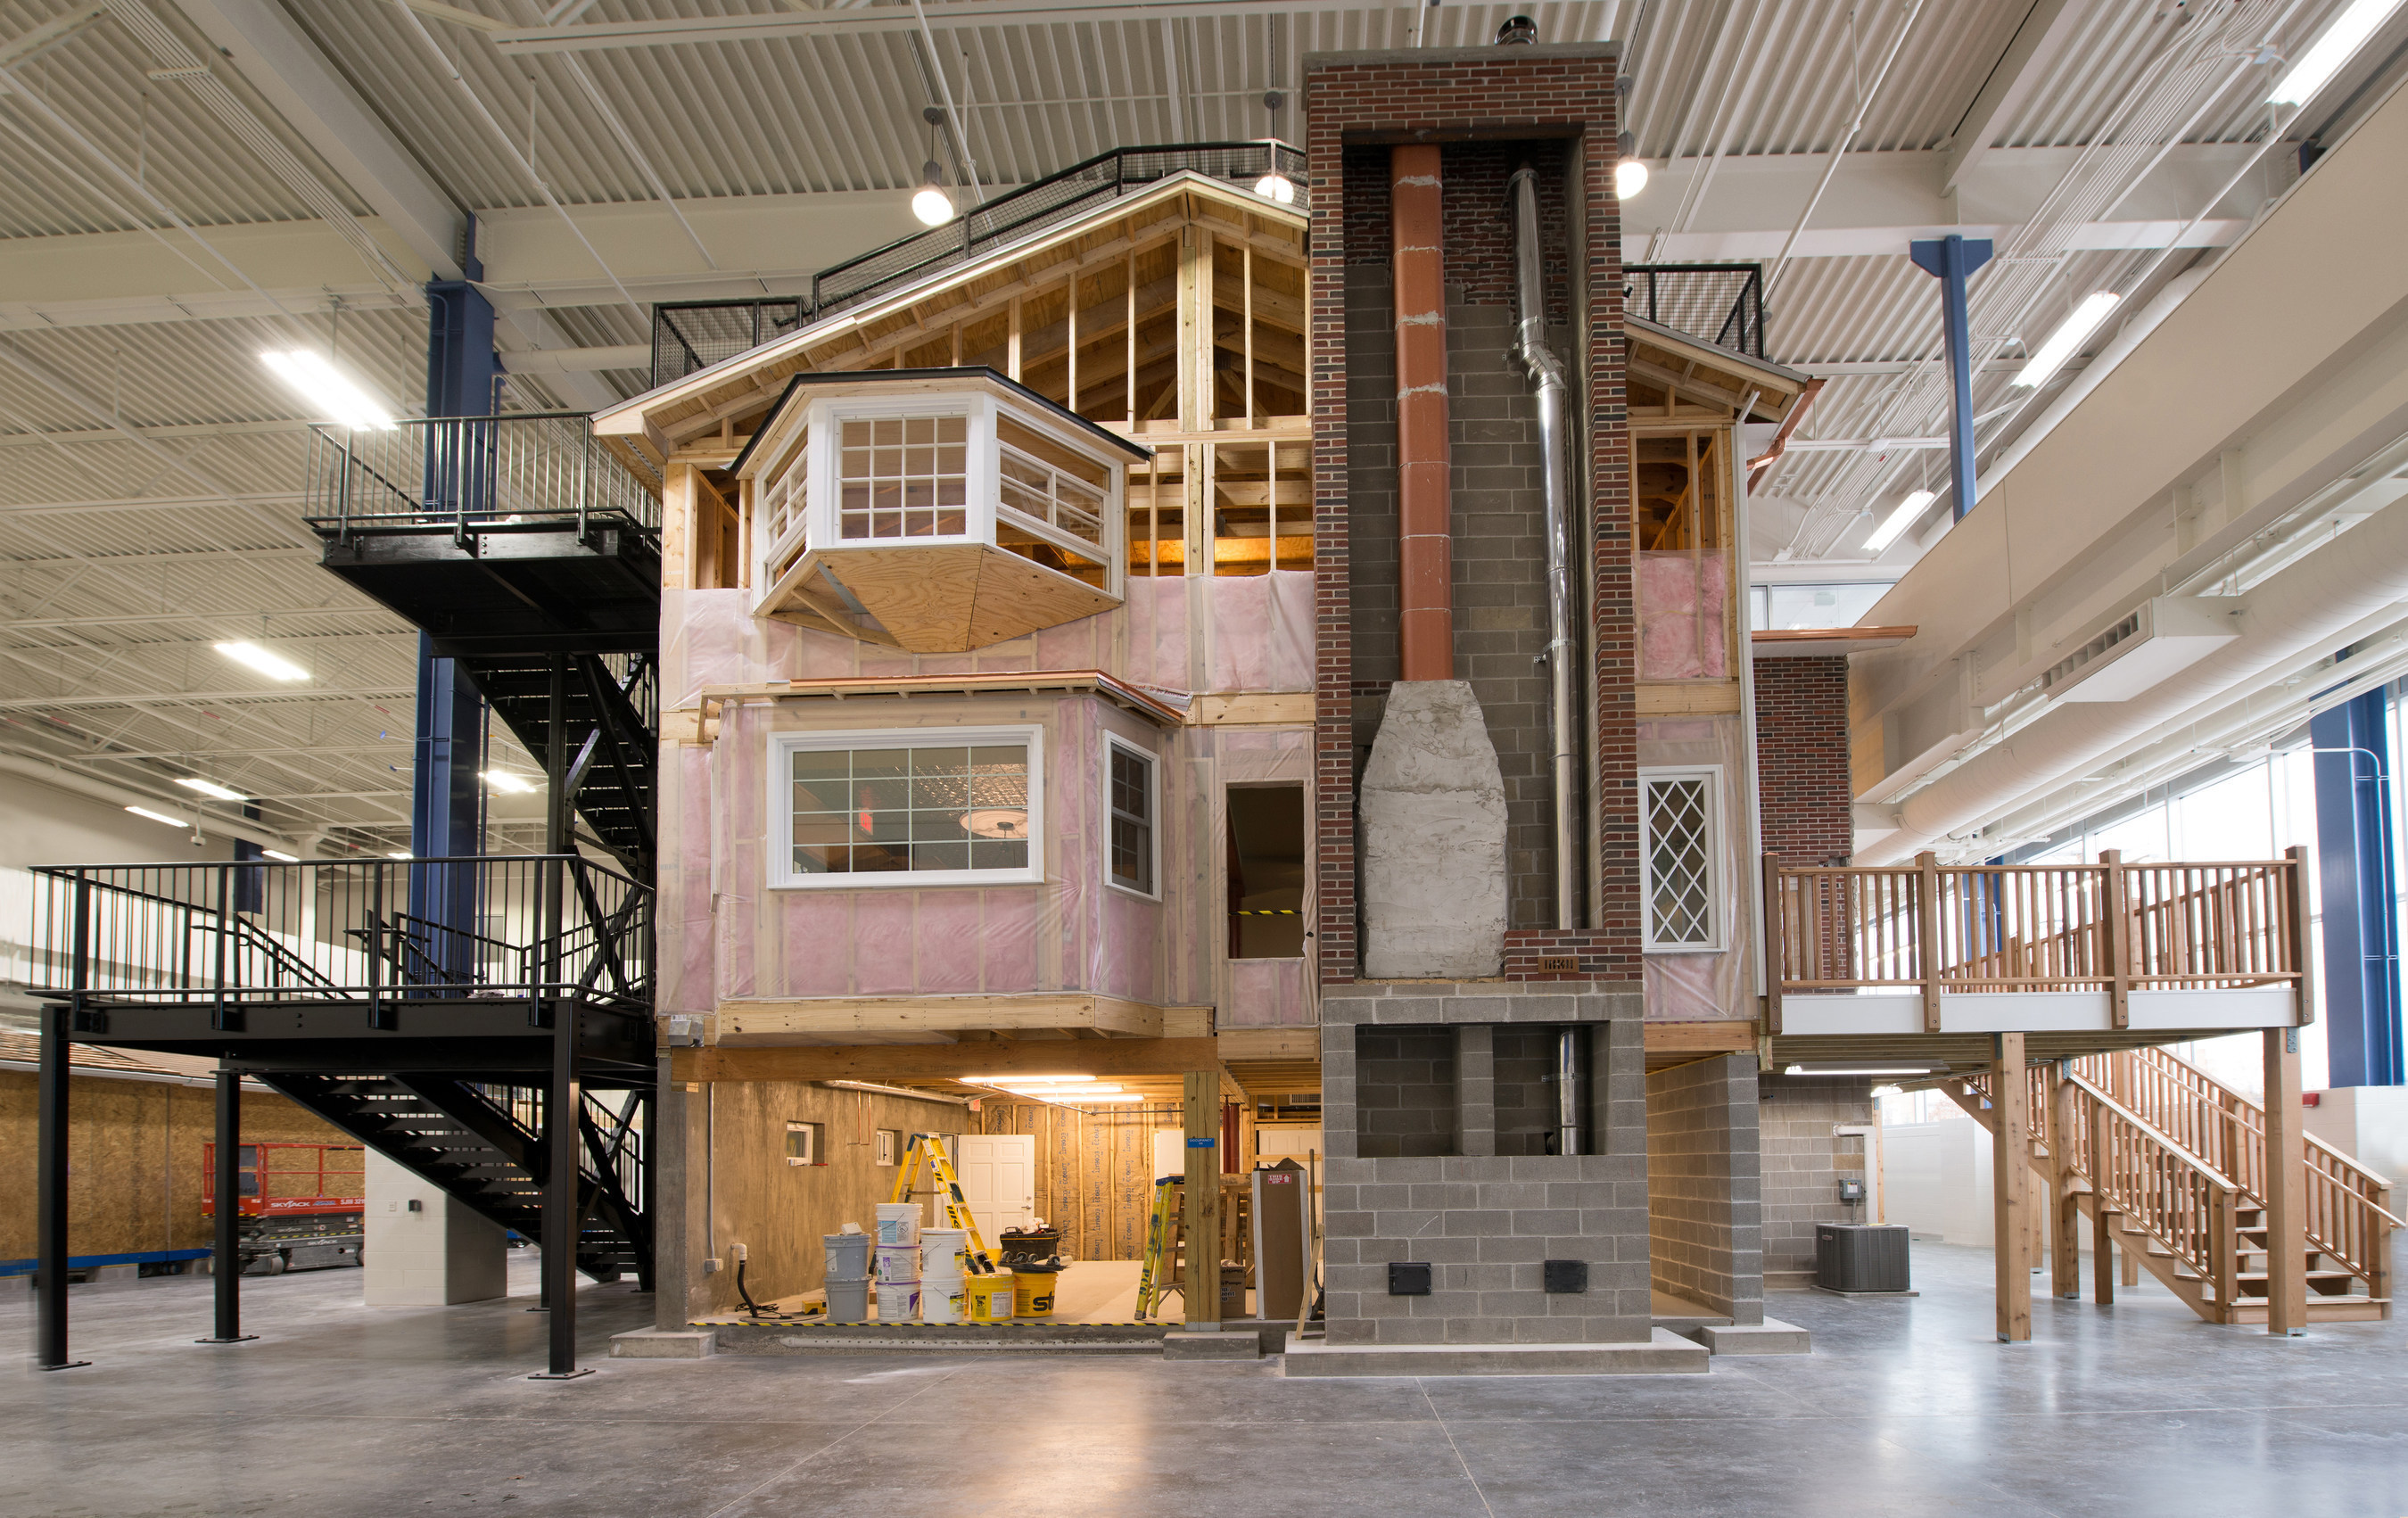 More than 400 different building materials were used in the construction of the three-story house within the Technical Learning Center at Erie Insurance. The facility will provide employees with opportunities to learn about the types of damage that can occur to homes.